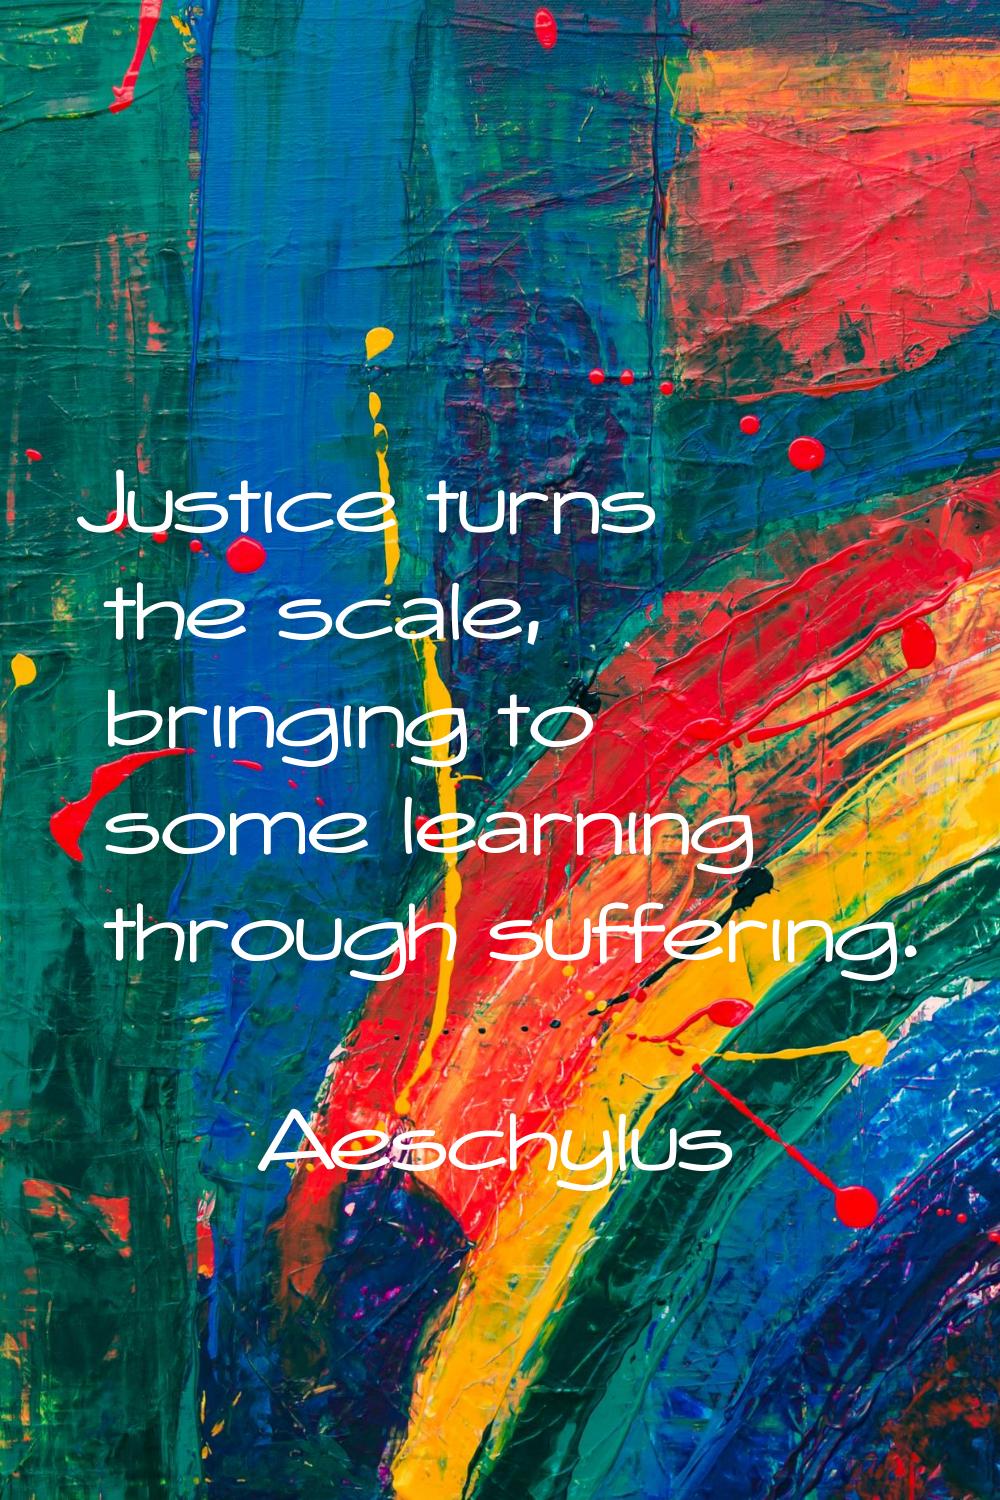 Justice turns the scale, bringing to some learning through suffering.